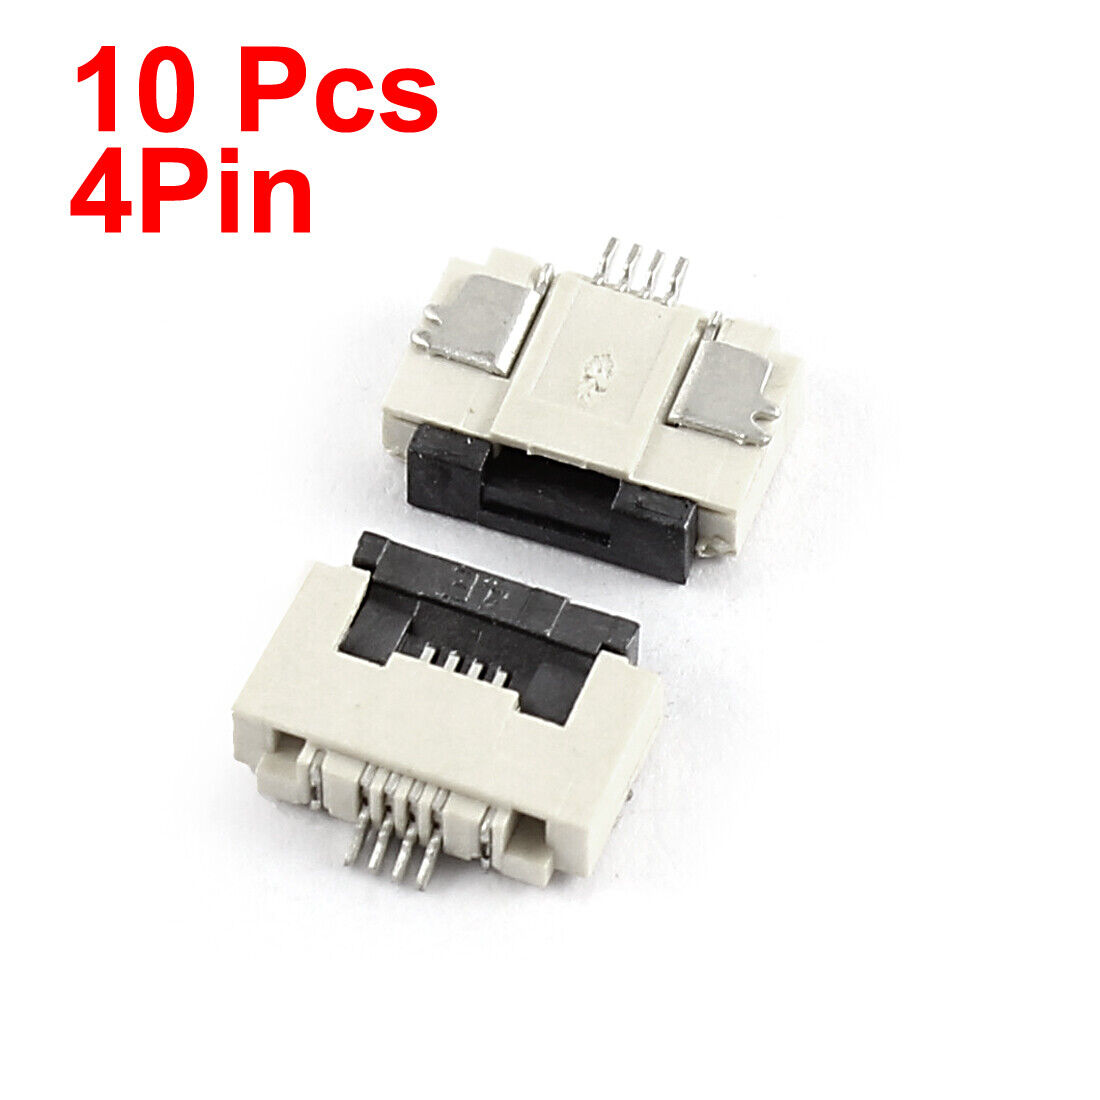 10Pcs Clamshell Type Bottom Port 4Pin 0.5mm Pitch FFC FPC Sockets Connector